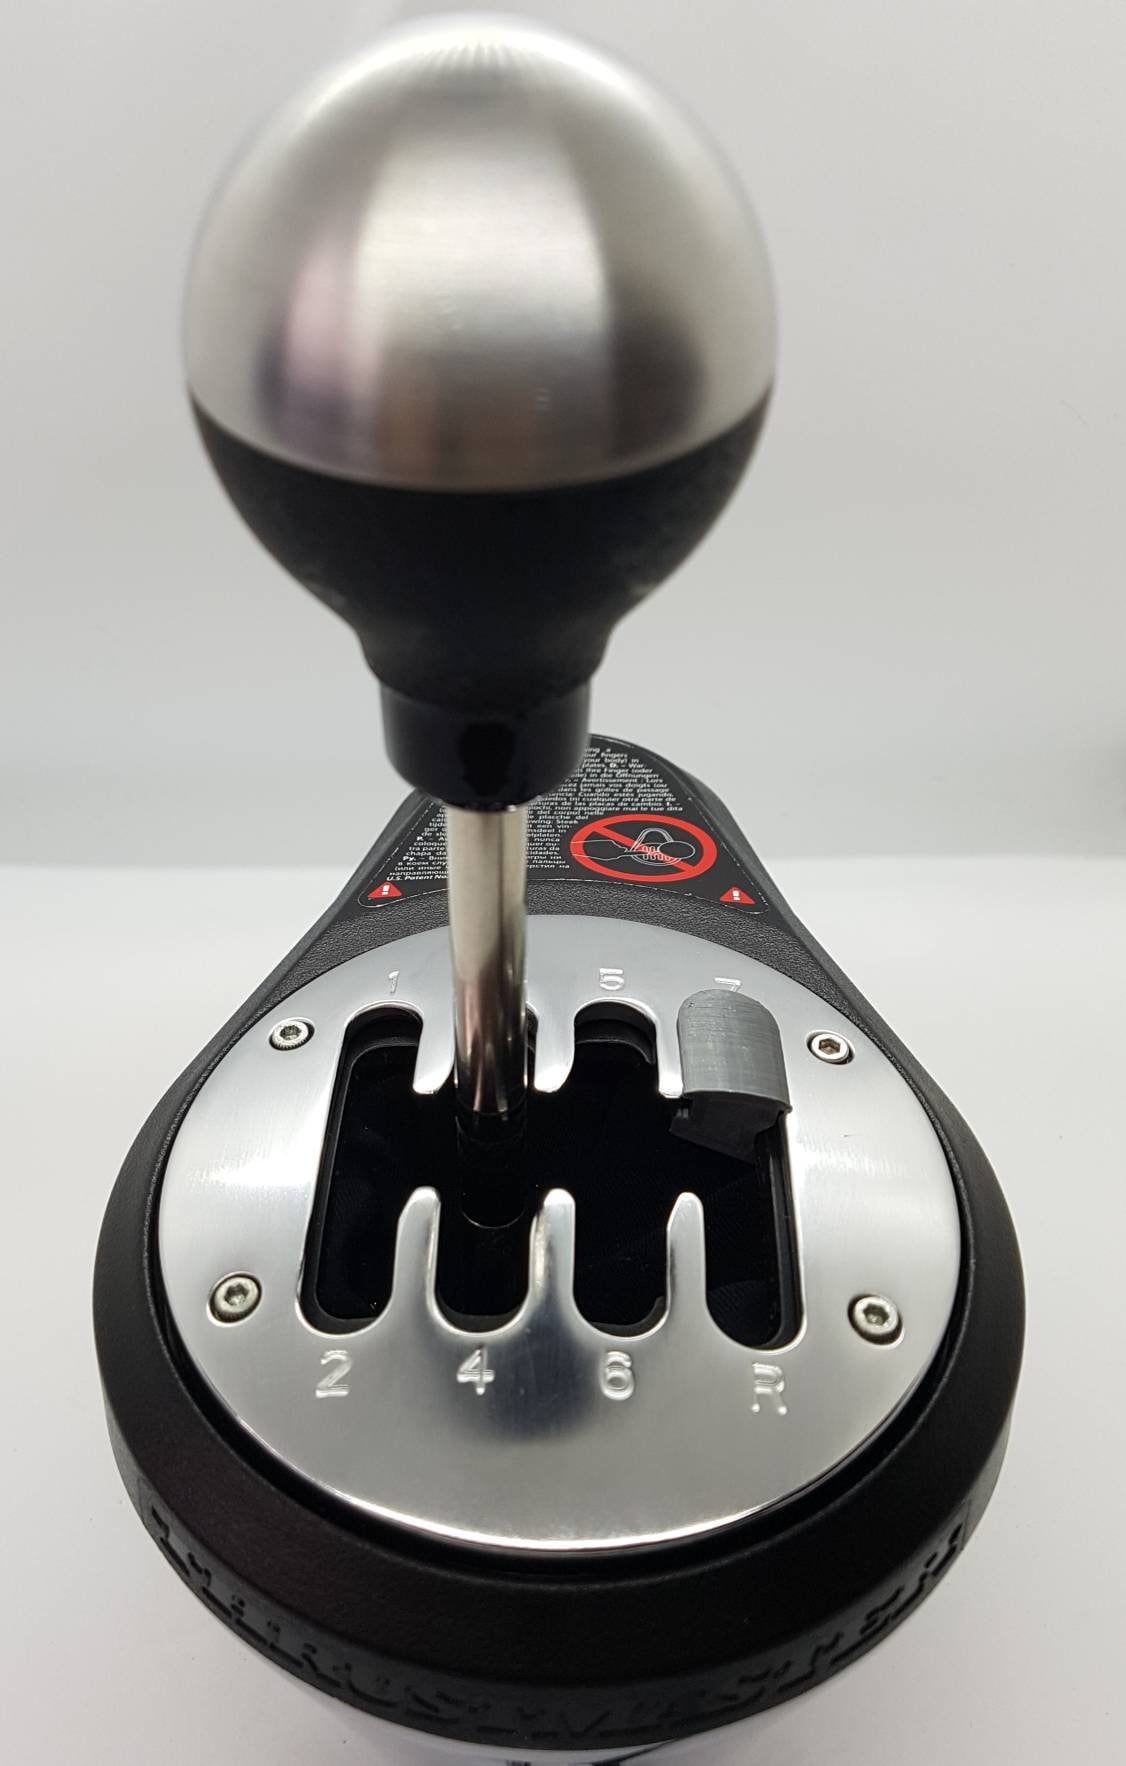 Thrustmaster TH8A Gearbox Shifter User Manual